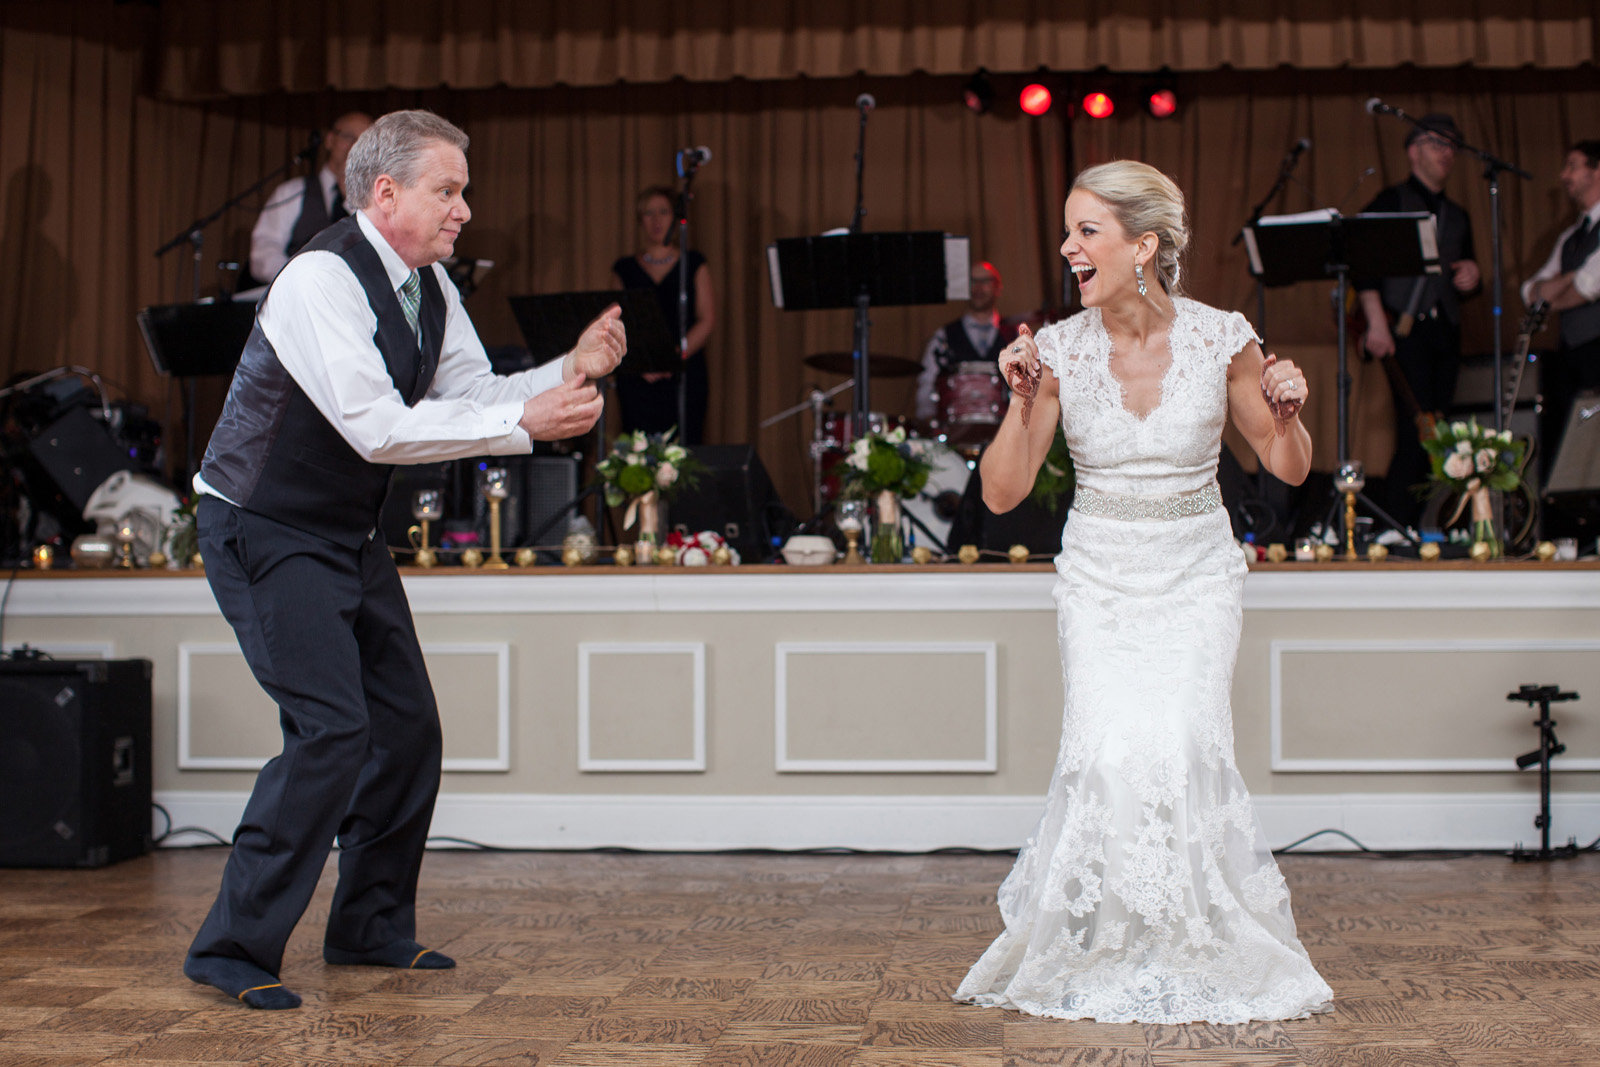 Dancing during a funny Father Daughter Dance